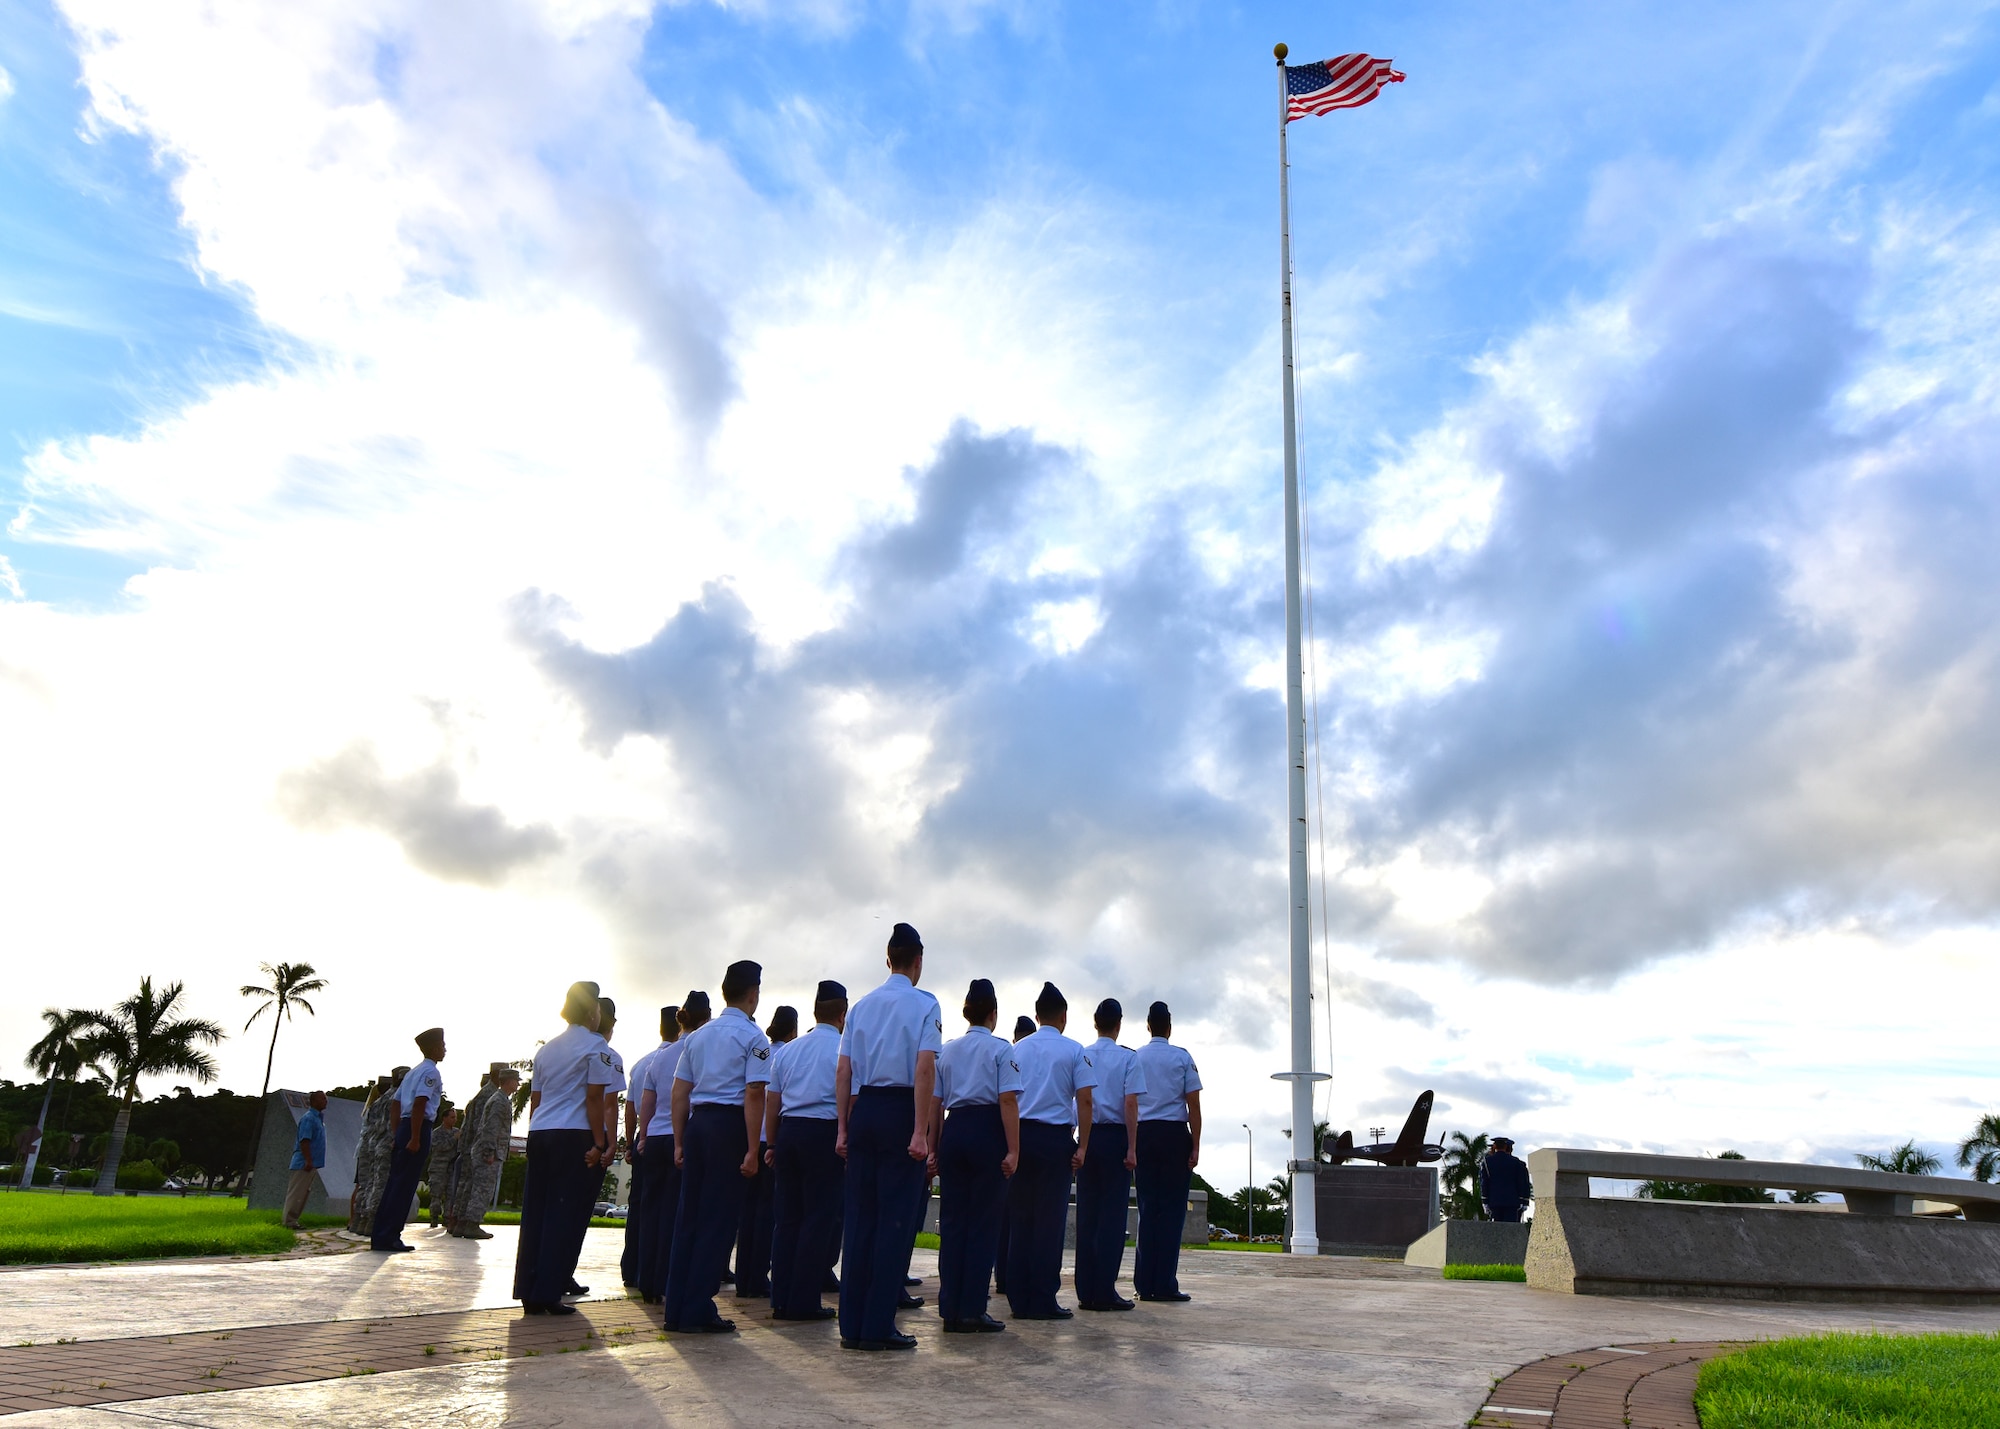 Airmen from the Joint Base Pearl Harbor-Hickam Air Force Sergeant’s Association present arms during a POW/MIA revile ceremony, on JBPHH, Hawaii, Sept. 14, 2015. The ceremony kicks off this year’s POW/MIA week, which honors the 1,627 missing or unaccounted for military members  in all branches of service. Some of the week’s events will include name readings of those missing or unaccounted for, a remembrance run and a honors and heritage ceremony, held at the Pearl Harbor visitor’s center.  (U.S. Air Force photo by Senior Airman Christopher Stoltz/Released)